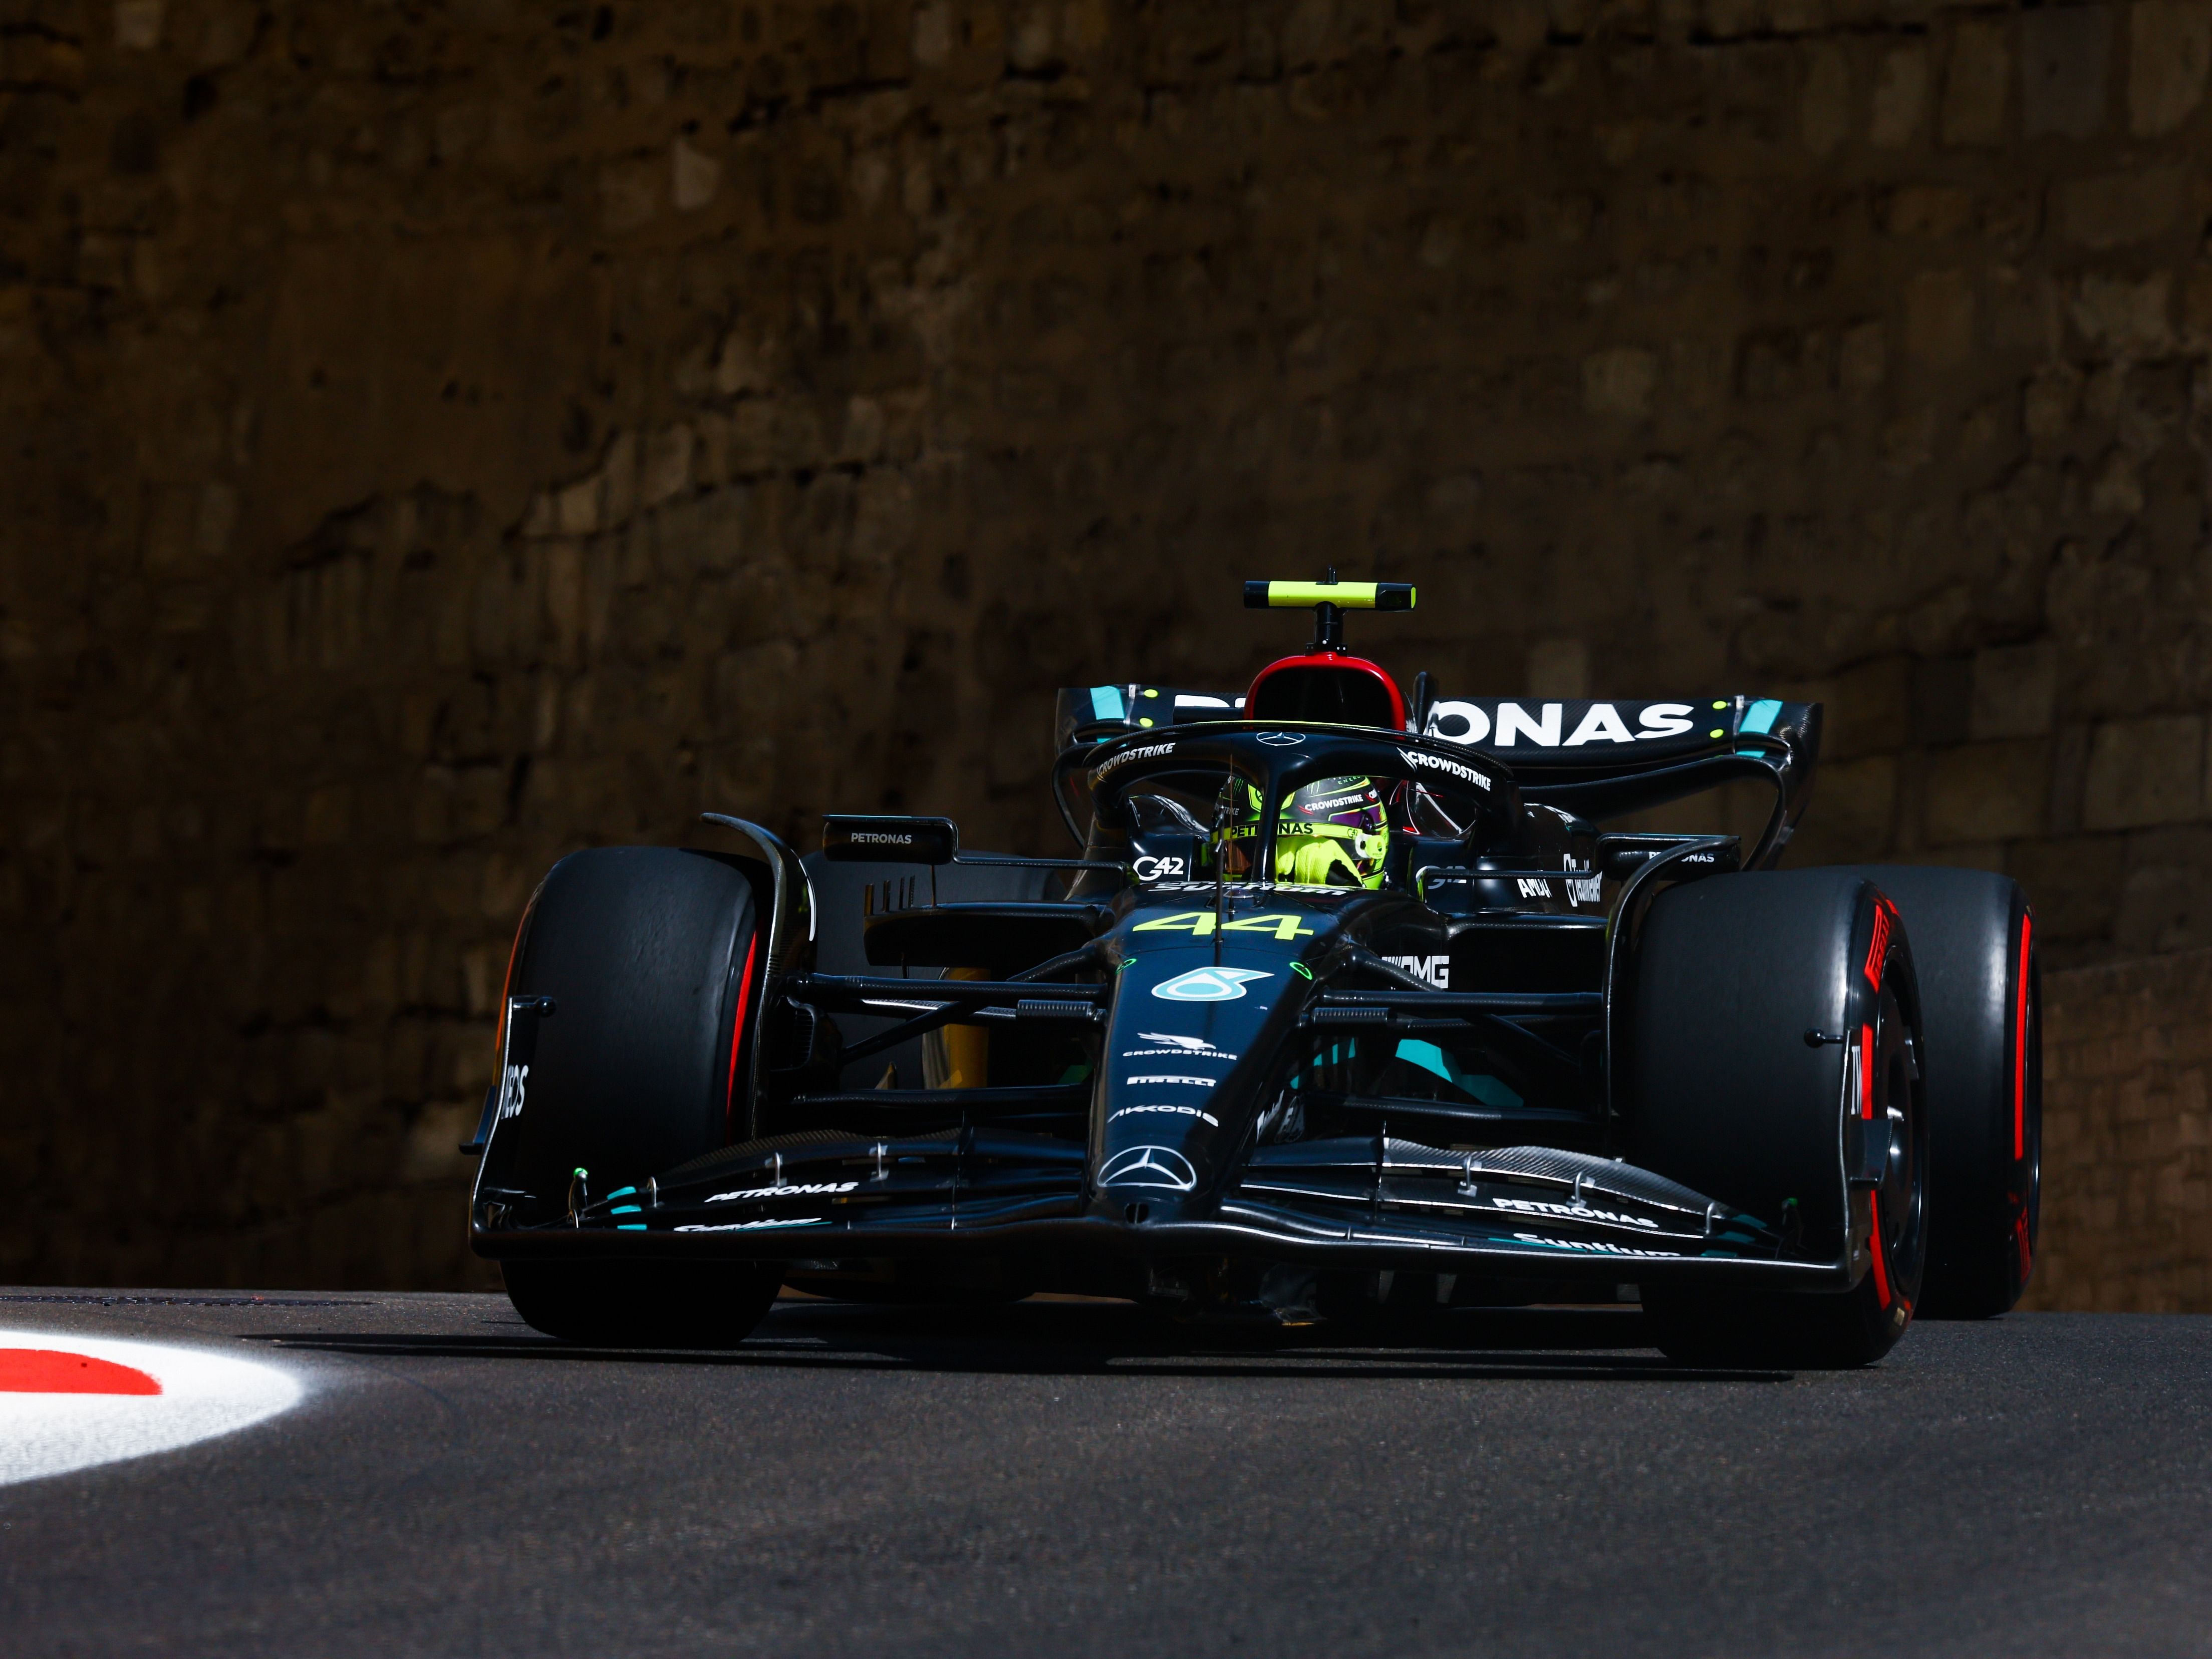 Lewis Hamilton (44) on track on his way to the grid prior to the 2023 F1 AzerbaijanGrand Prix. (Photo by Francois Nel/Getty Images)